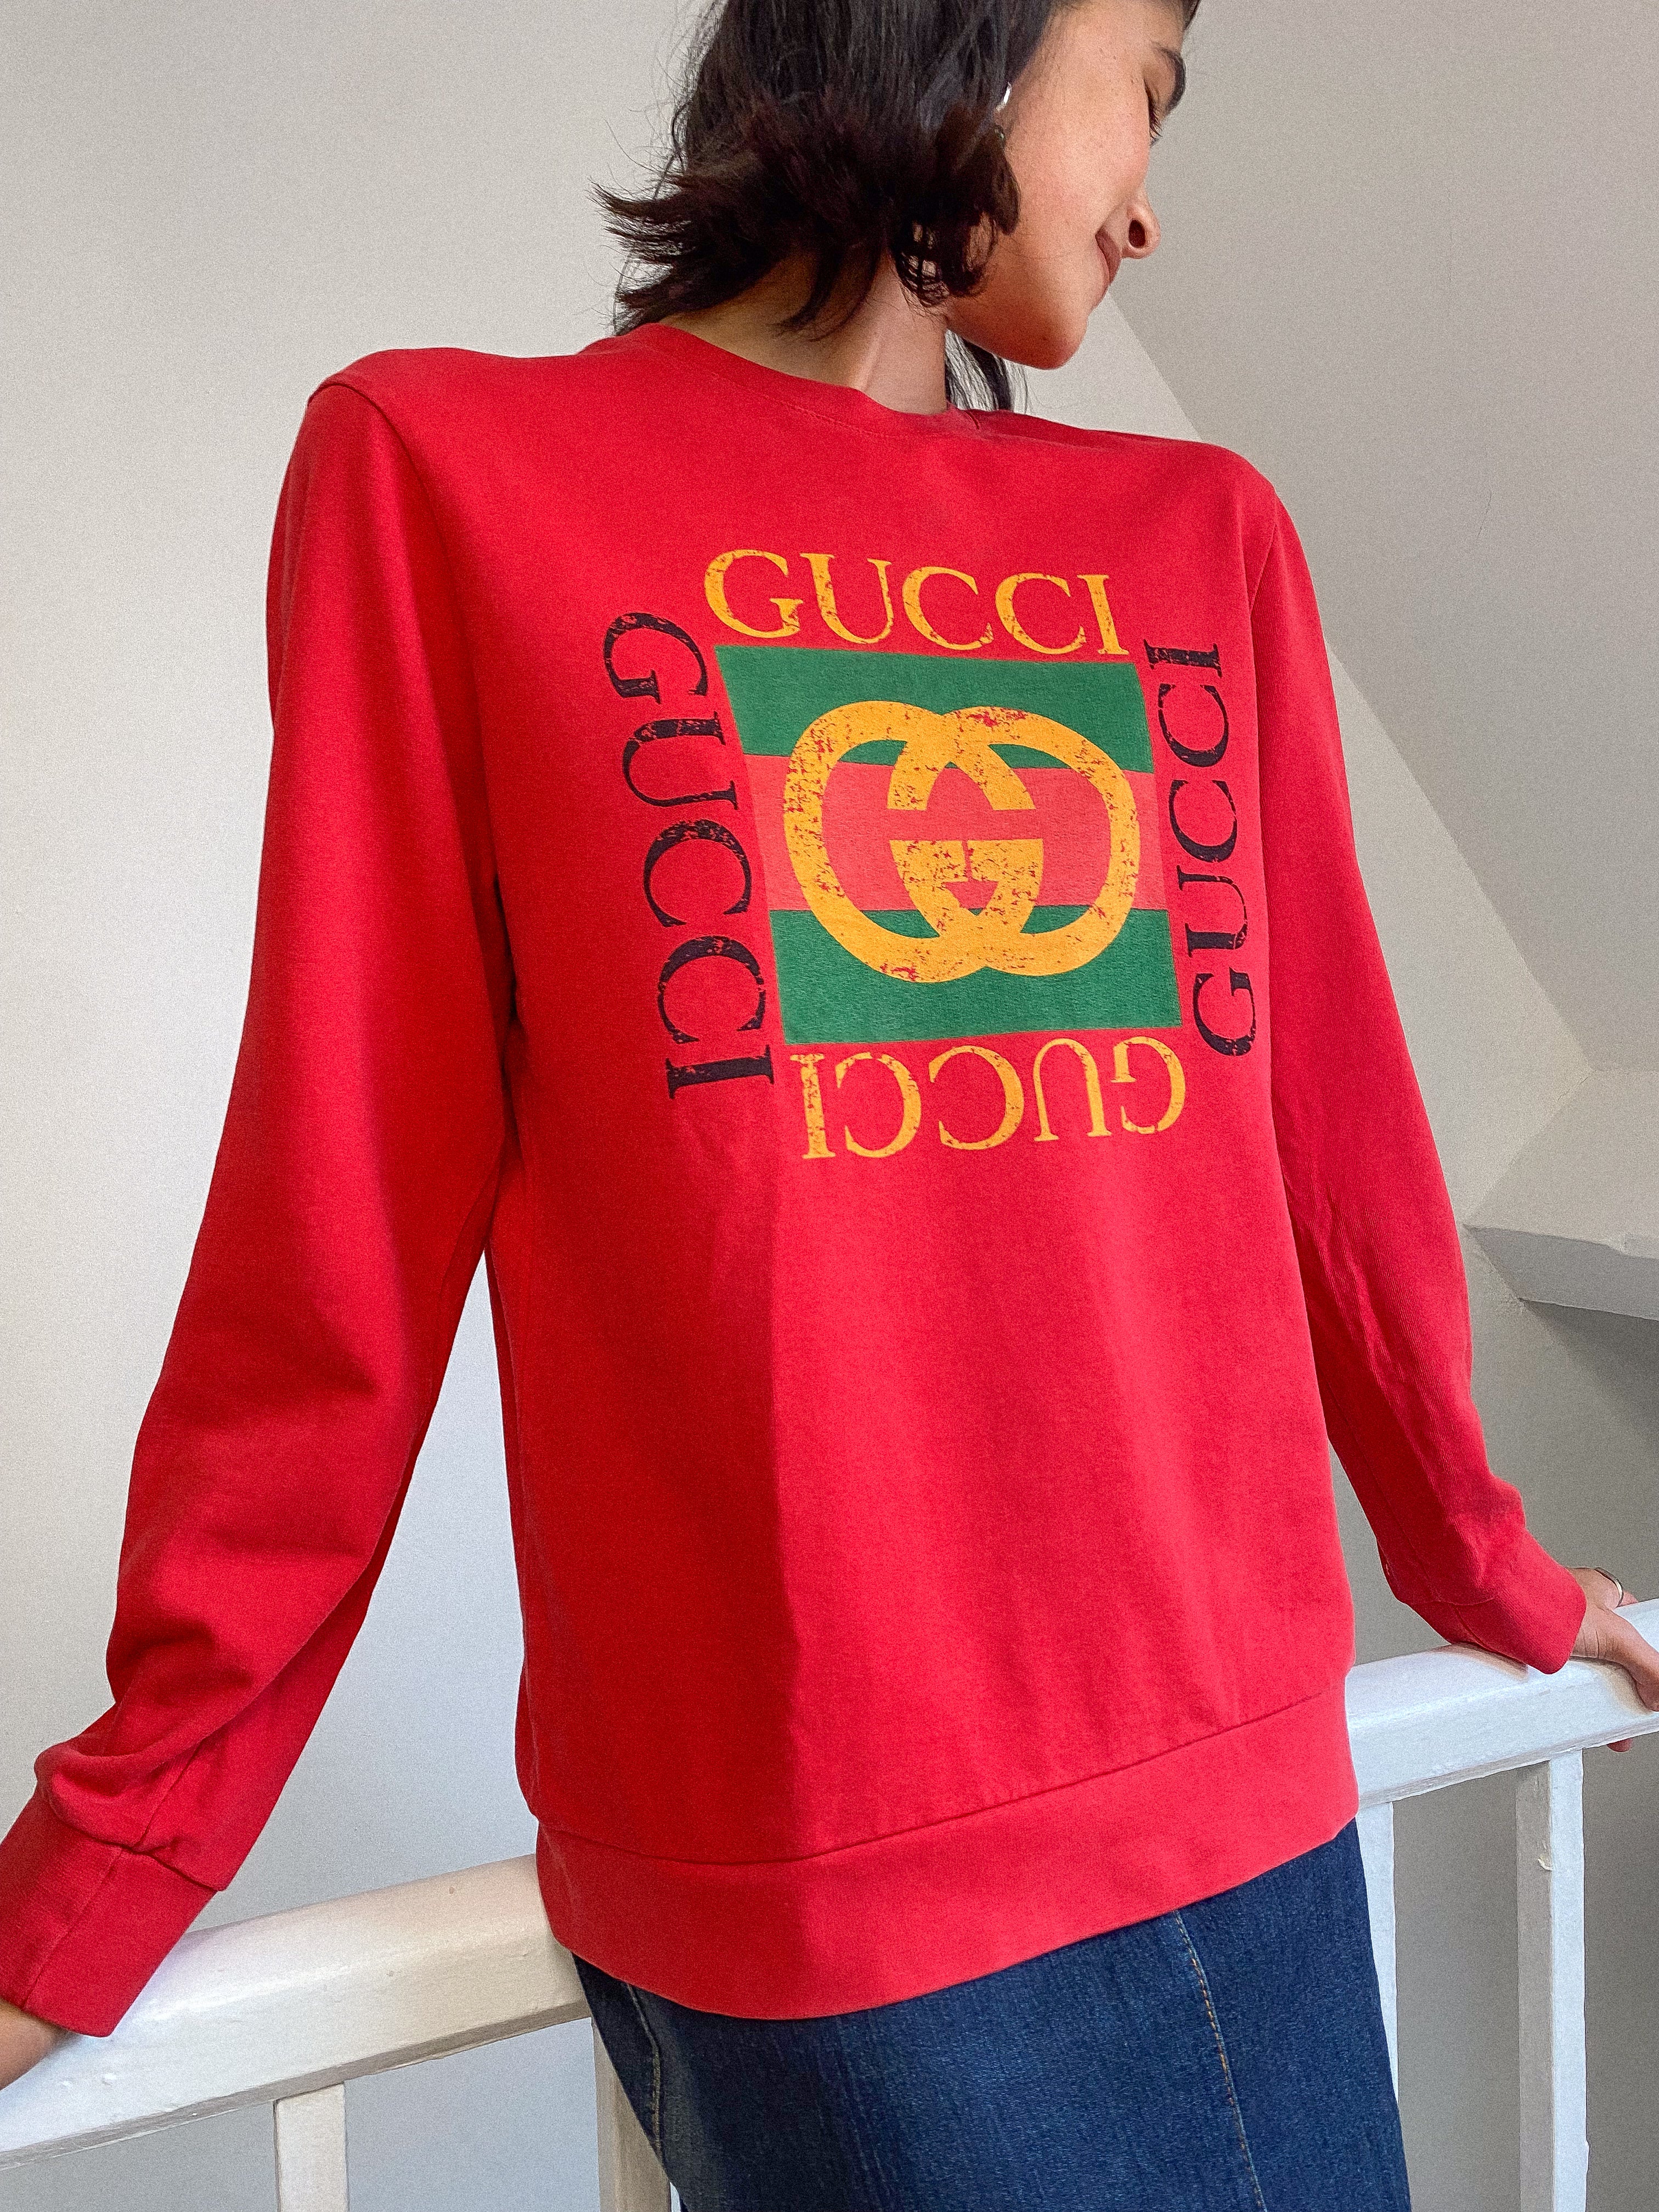 Straight fit classic Gucci logo printed on front and ribbed neck, hem and cuffs.